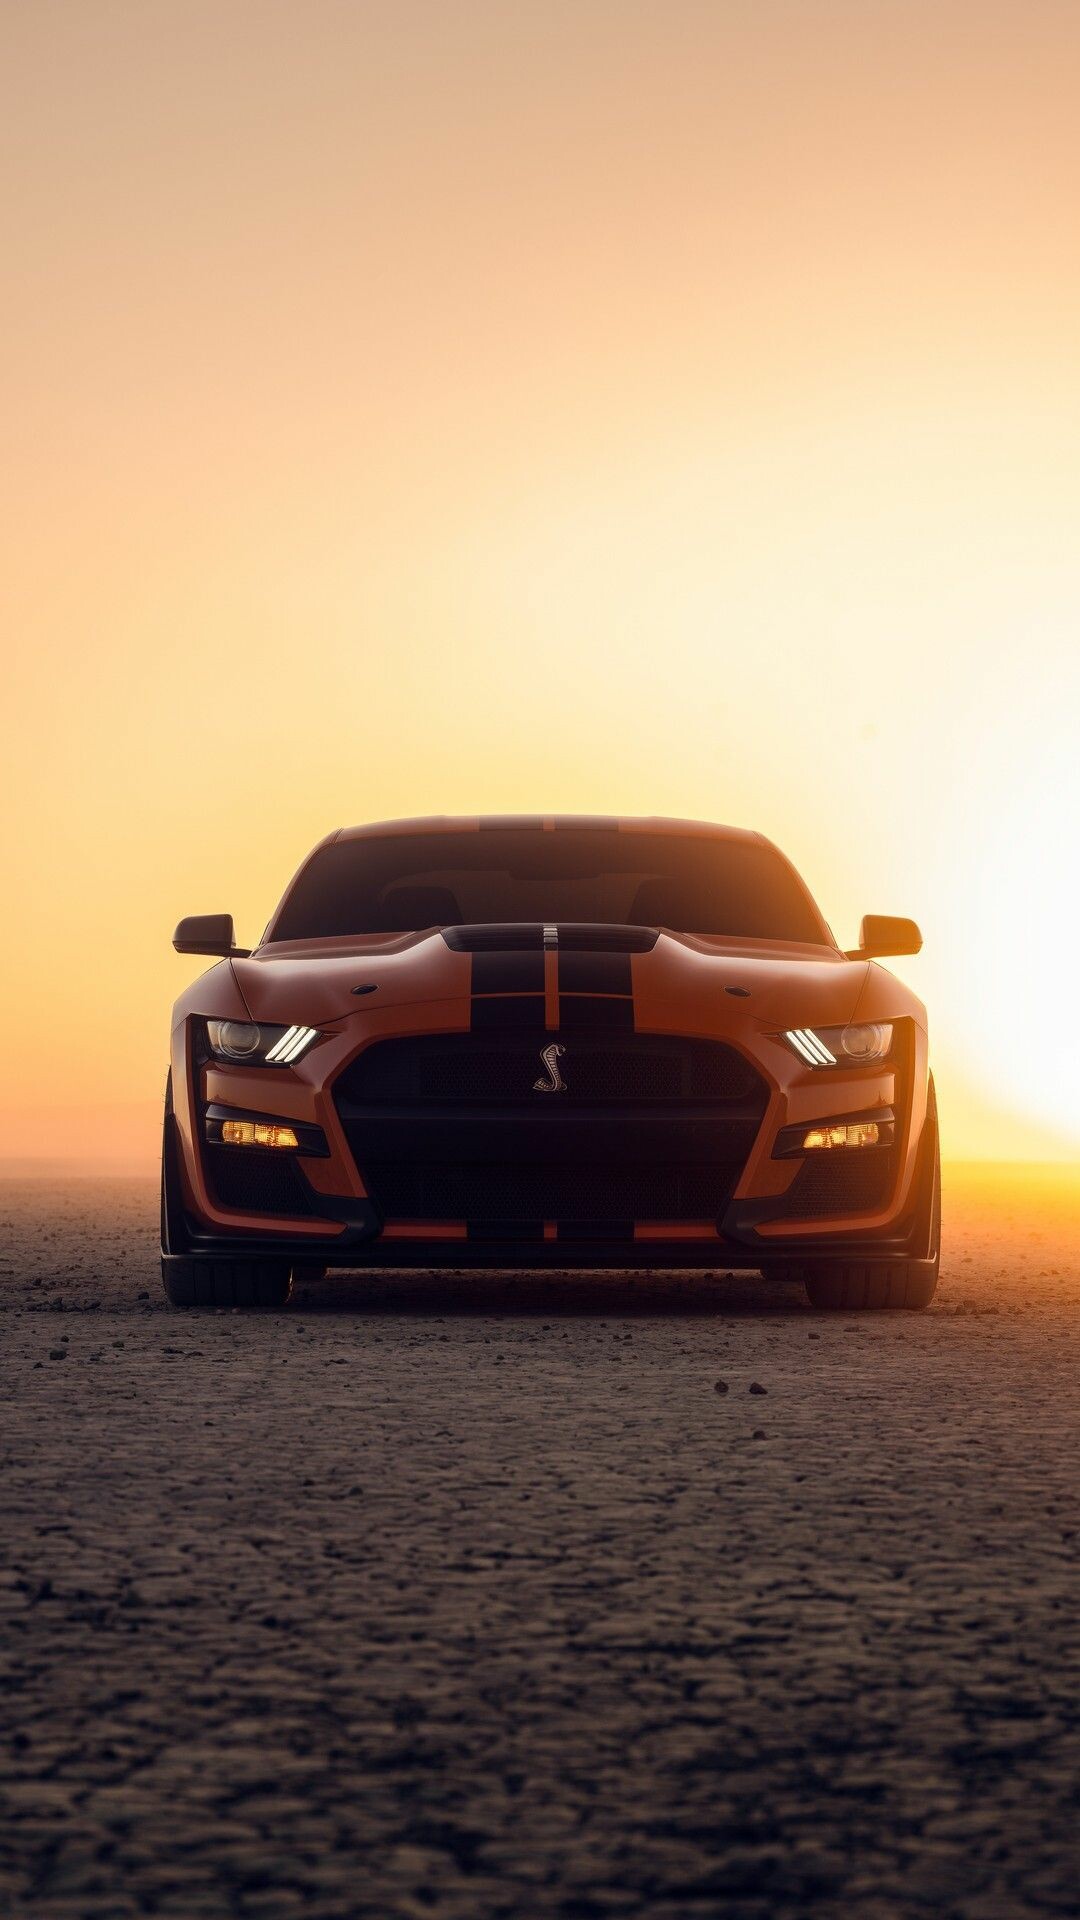 Ford: V8 engine, Ford's fastest Mustang, Shelby. 1080x1920 Full HD Background.